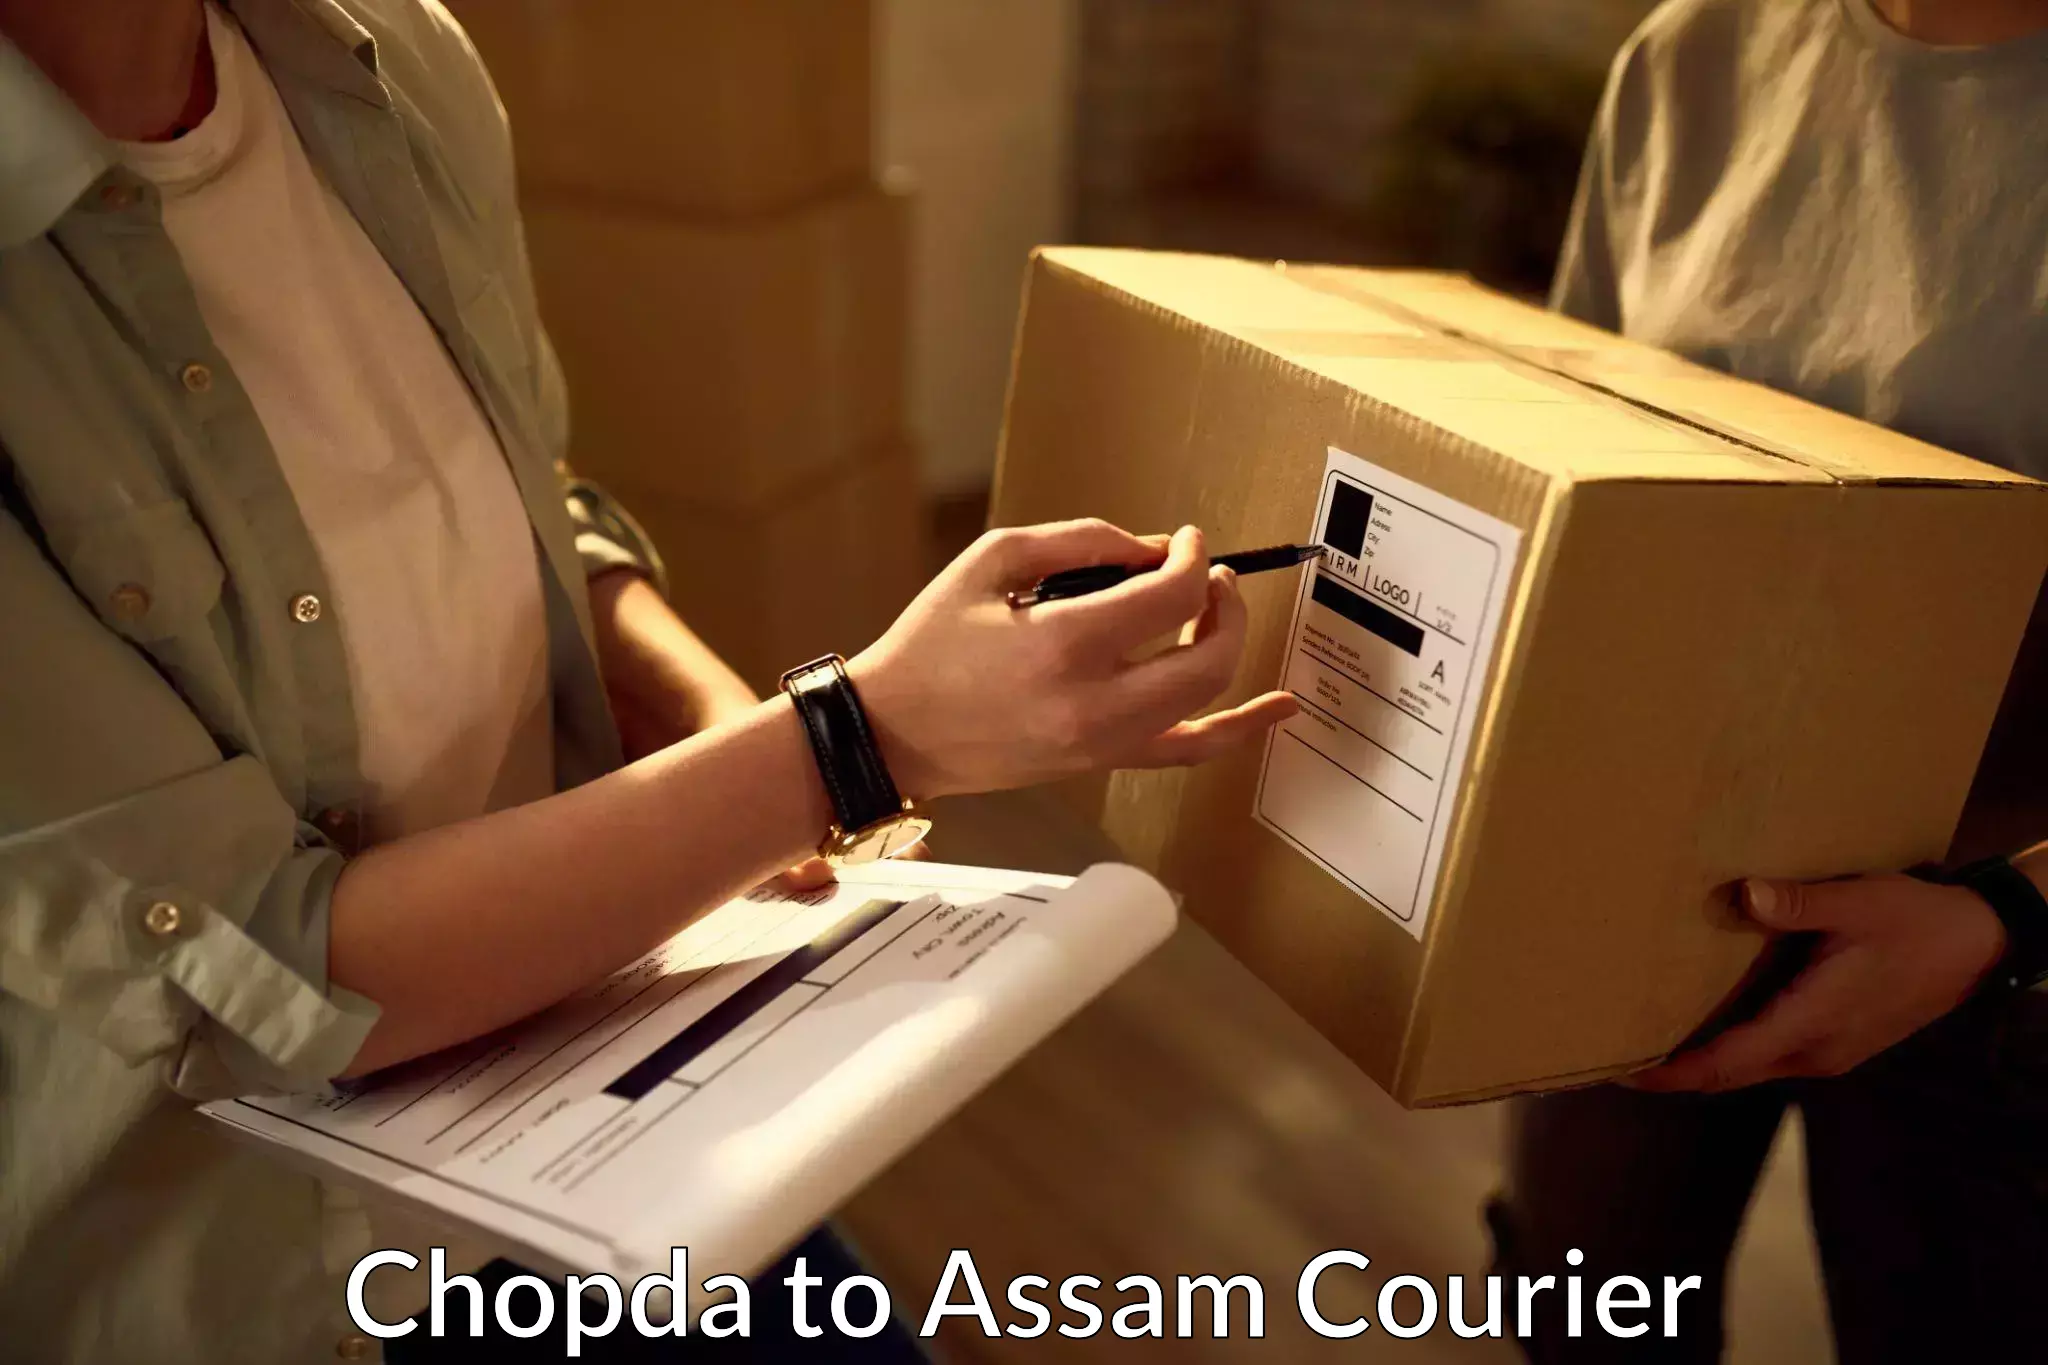 Customizable delivery plans in Chopda to Nagaon